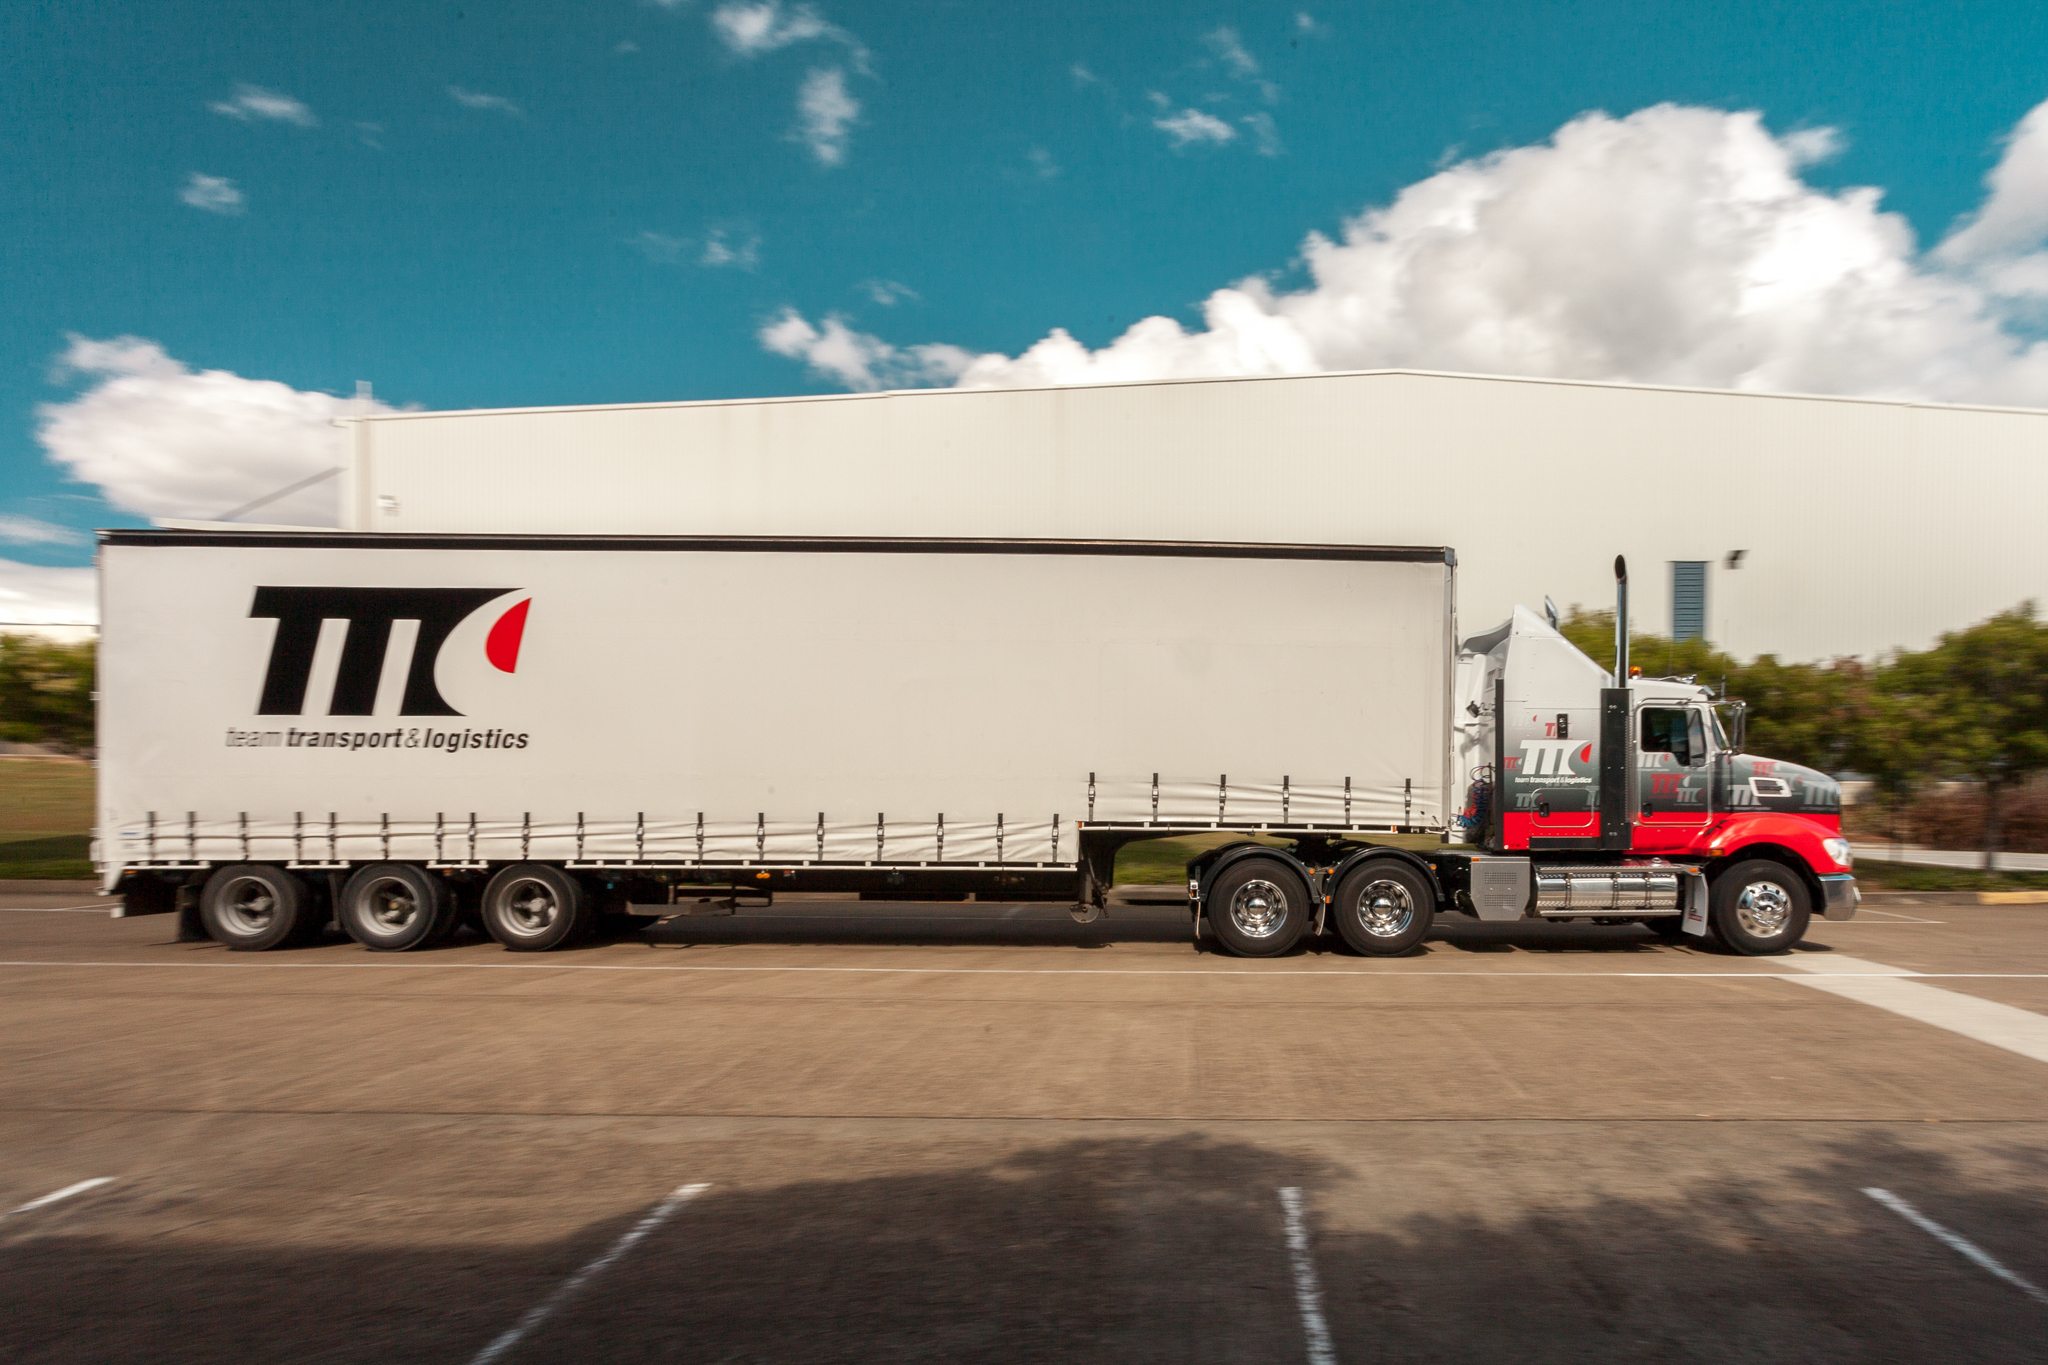 A trailer truck with Team Transport & Logistics branding and logo from the side.